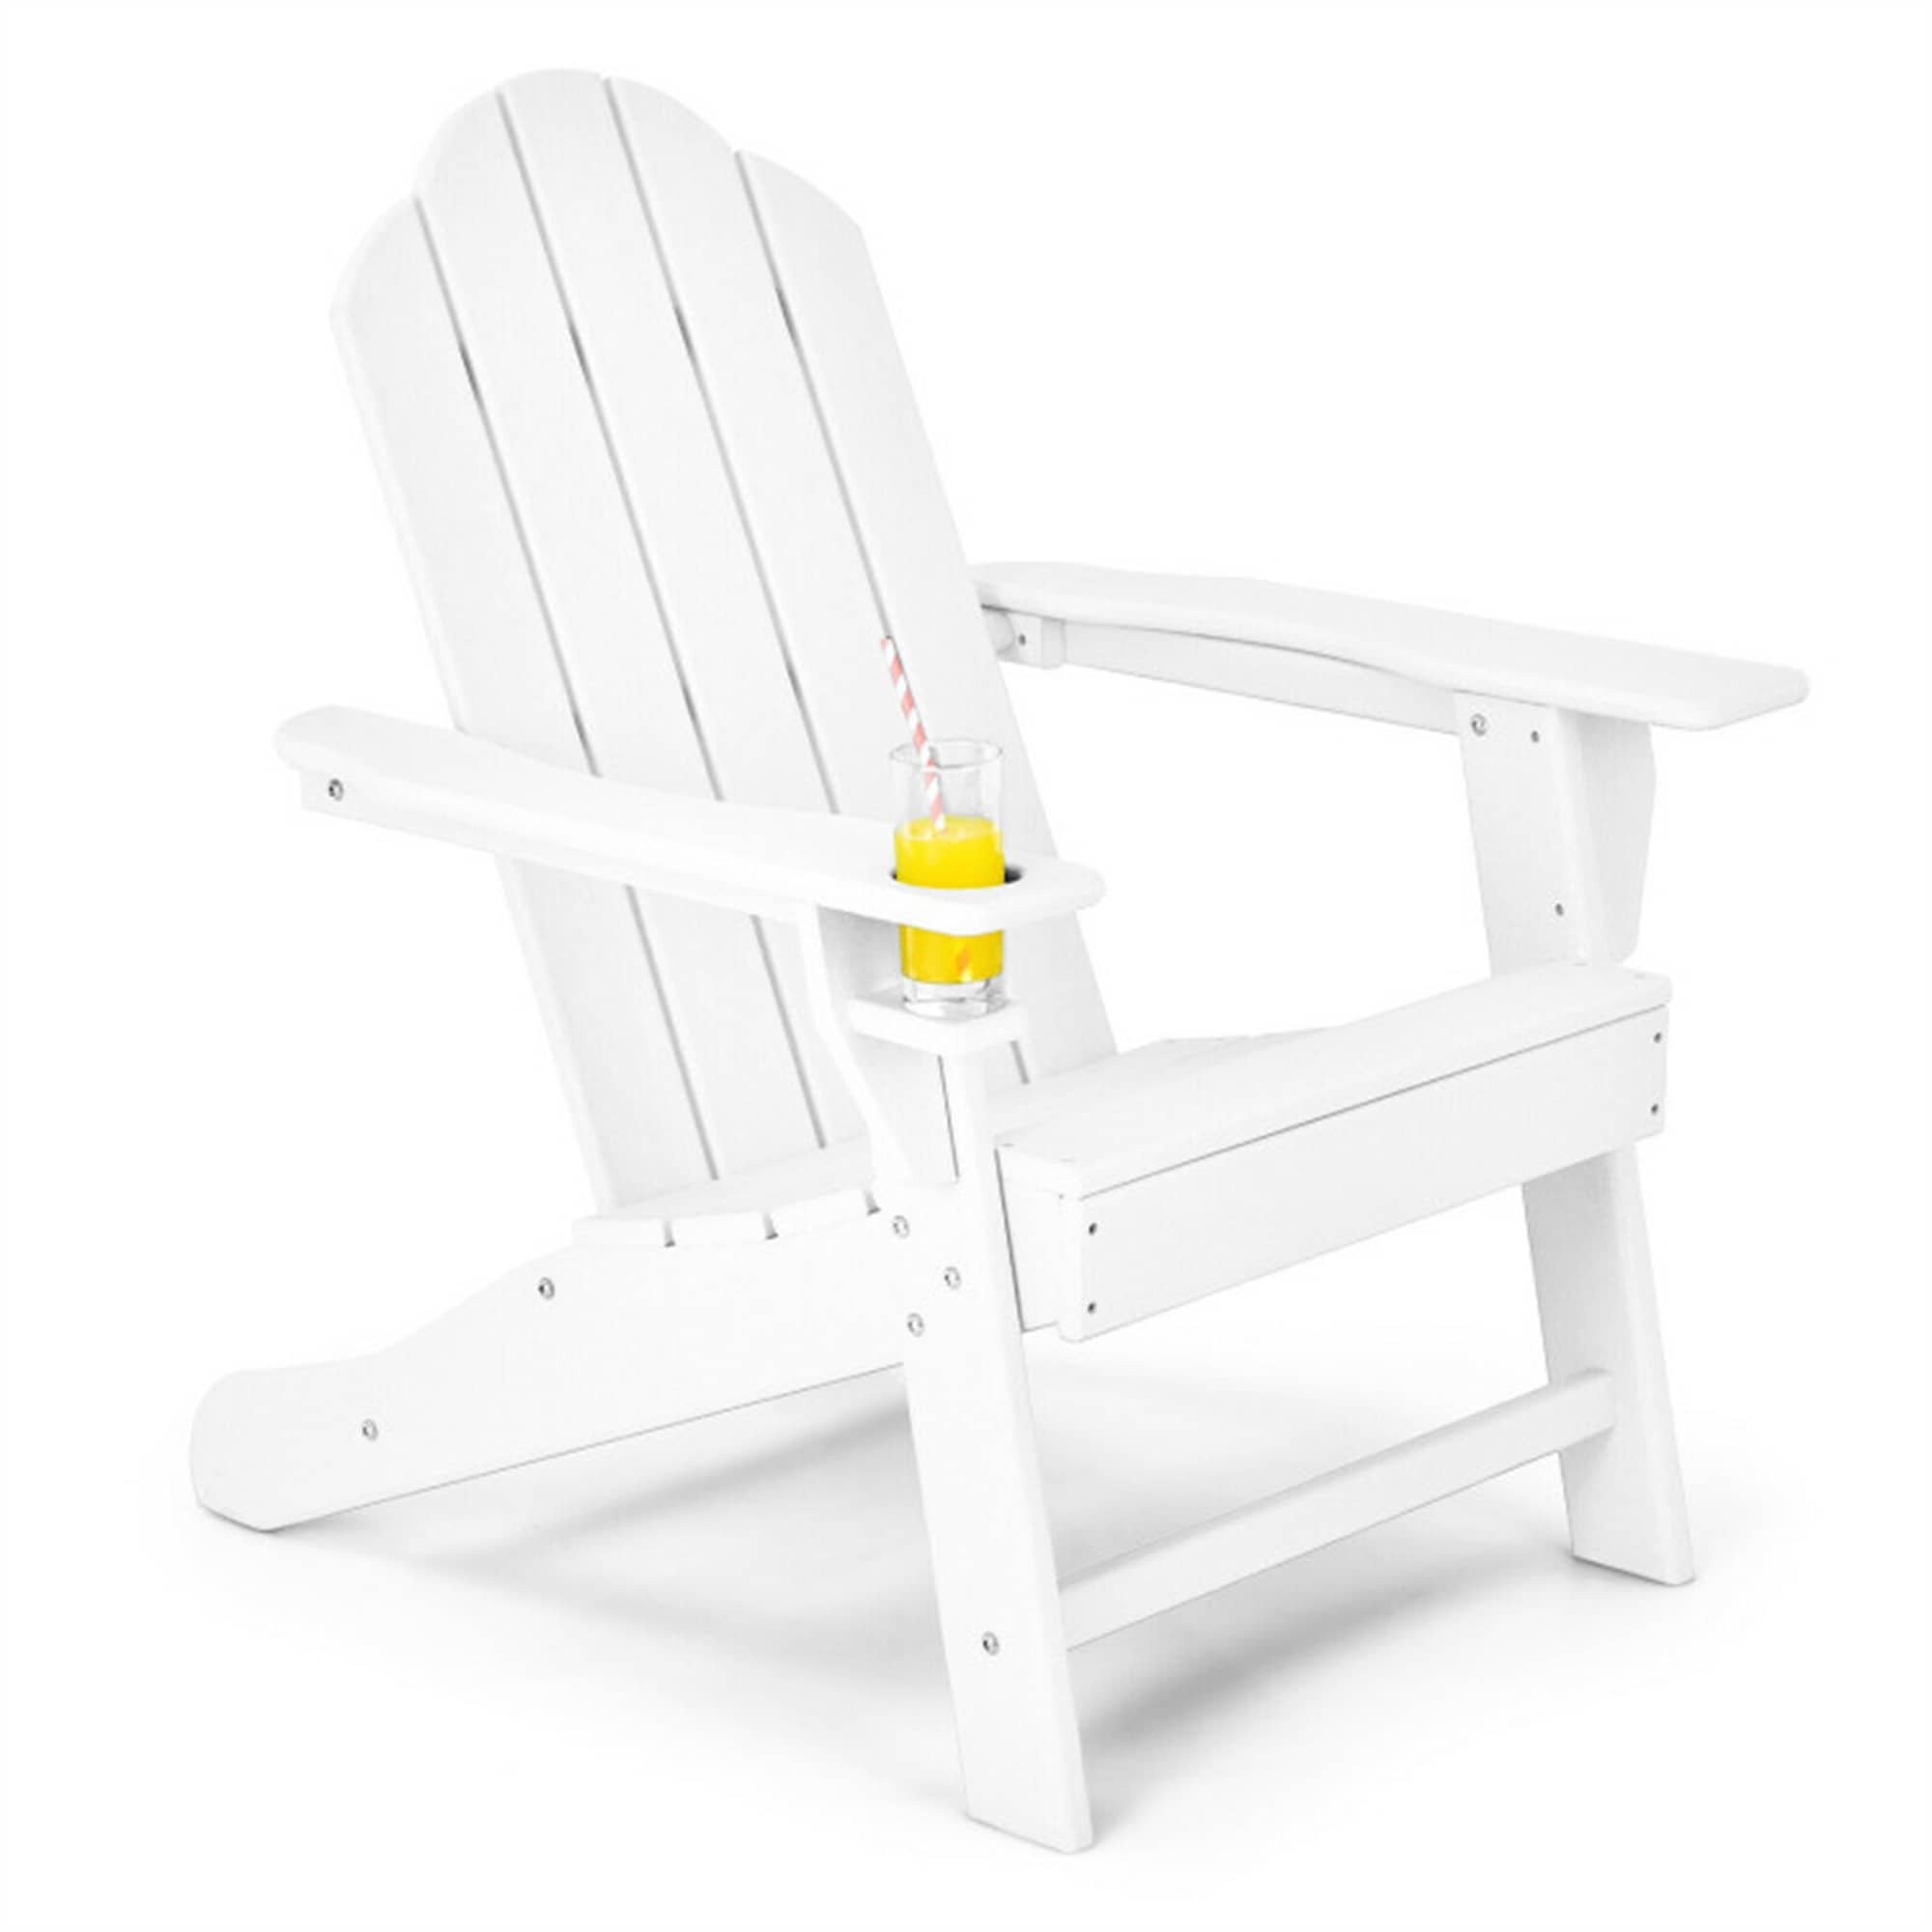 Outdoor Adirondack Chair with Built-in Cup Holder for Backyard and Porch